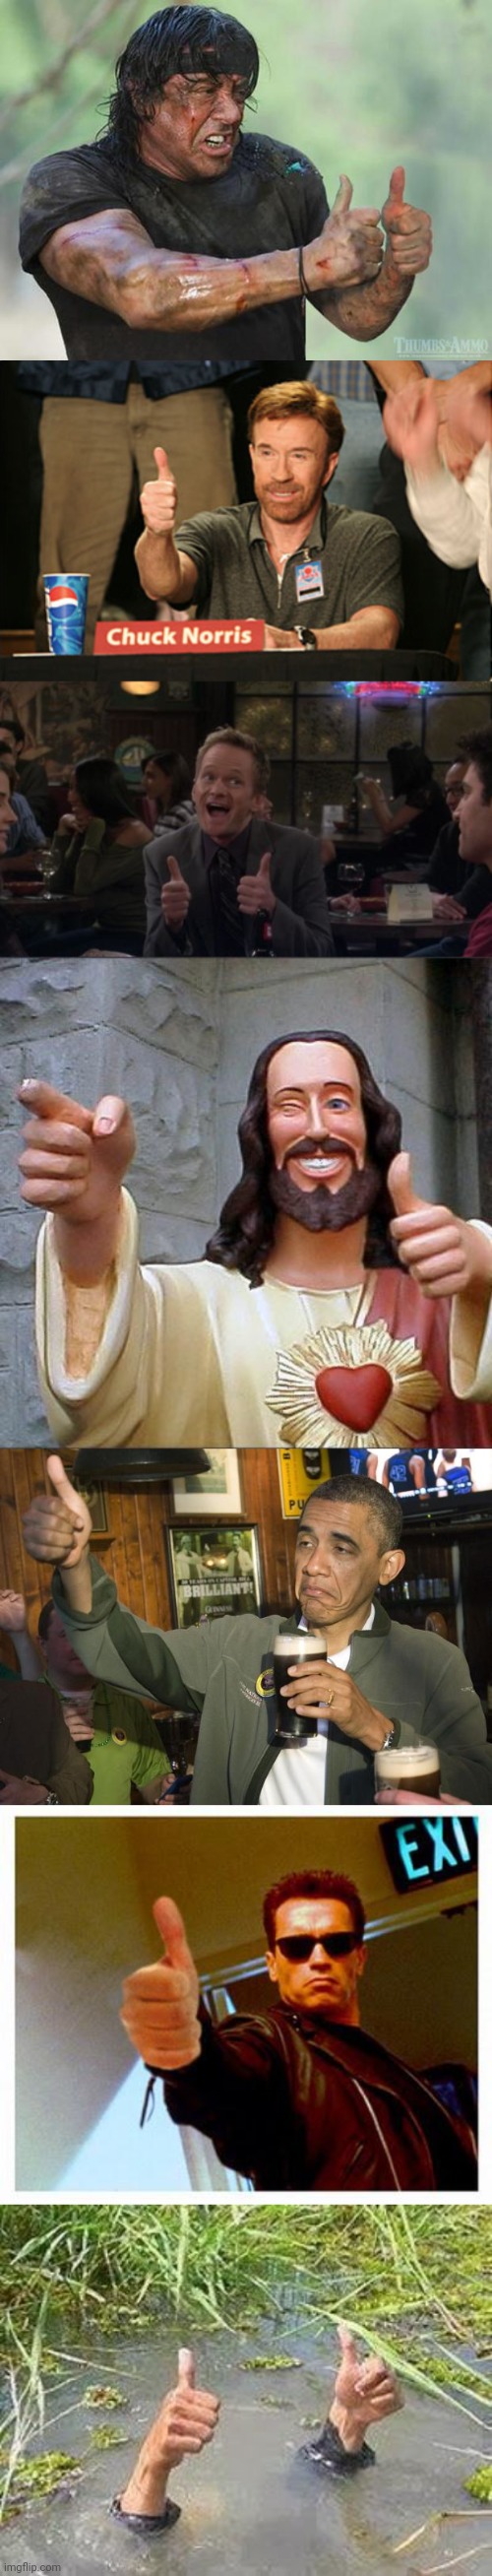 image tagged in memes,buddy christ,chuck norris approves,barney stinson win,not bad,thumbs up rambo | made w/ Imgflip meme maker